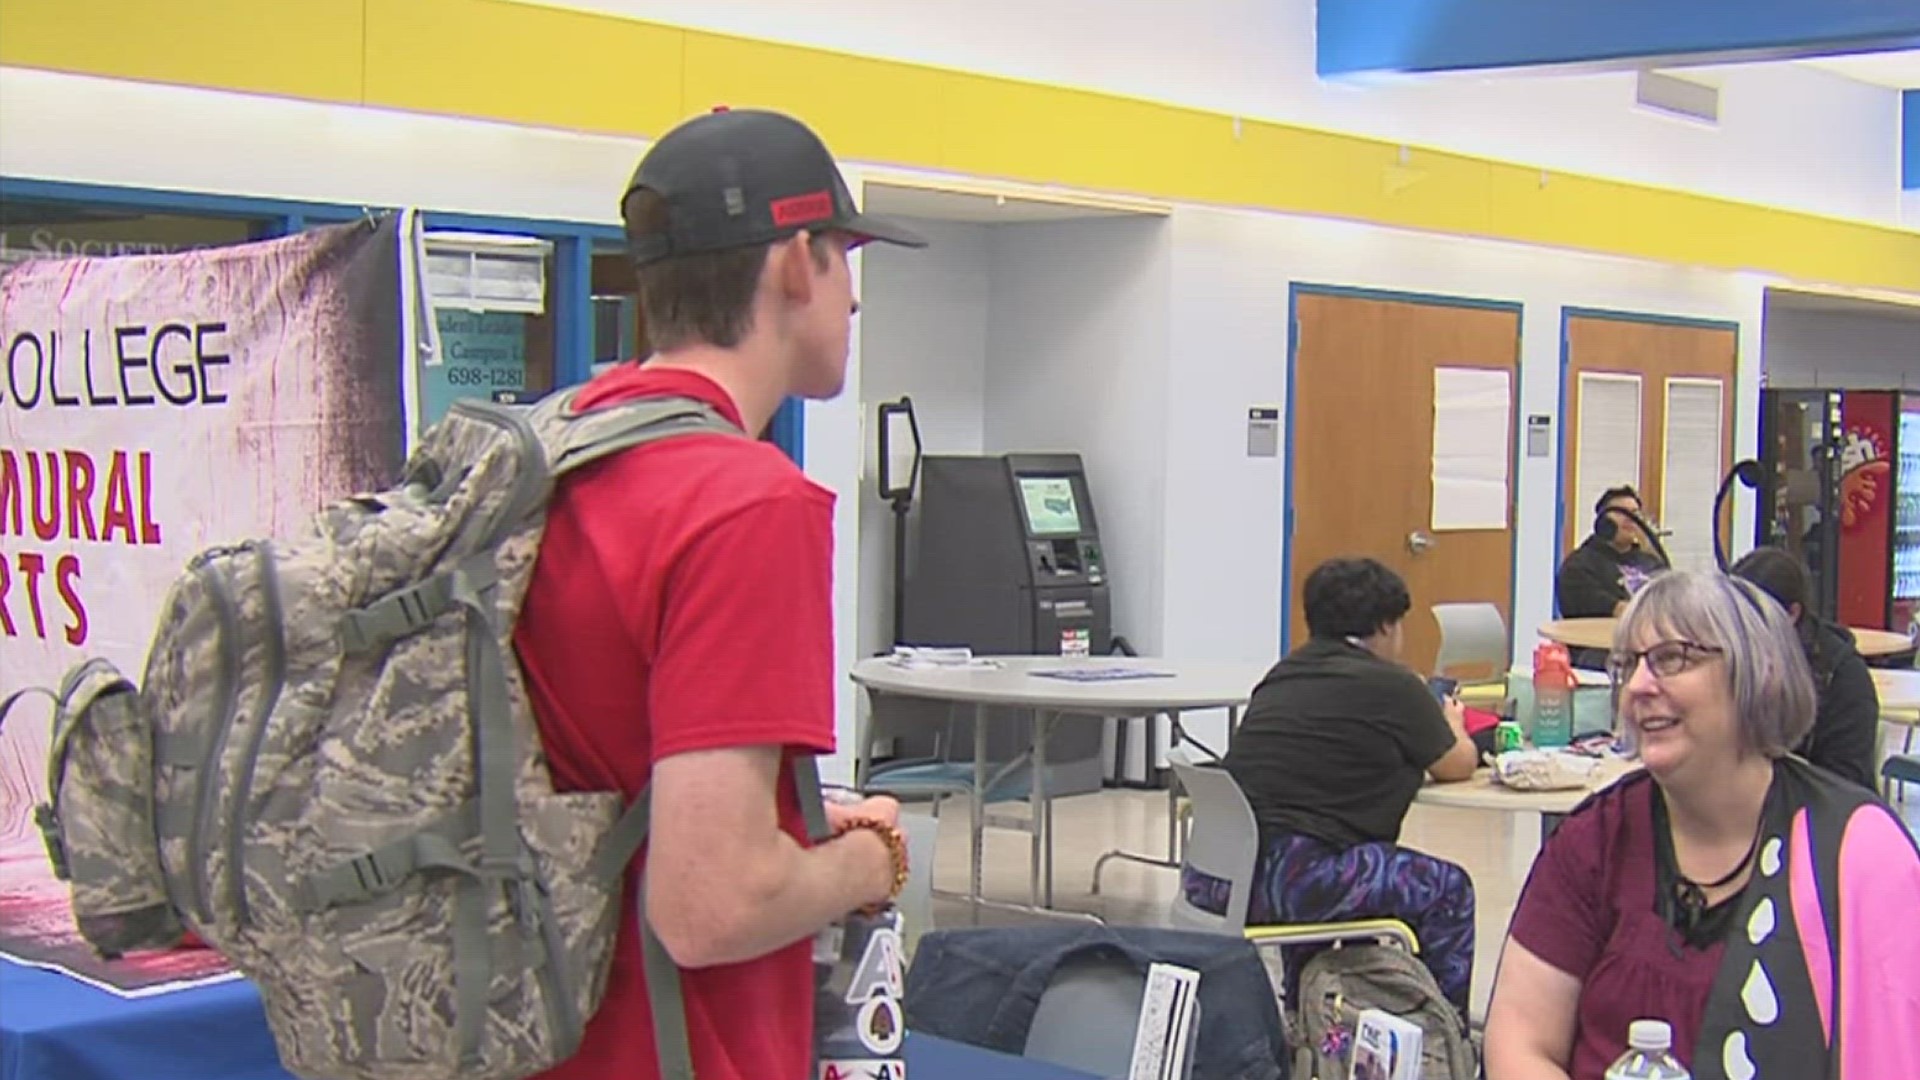 Students could get free flu shots and health screenings, as well.